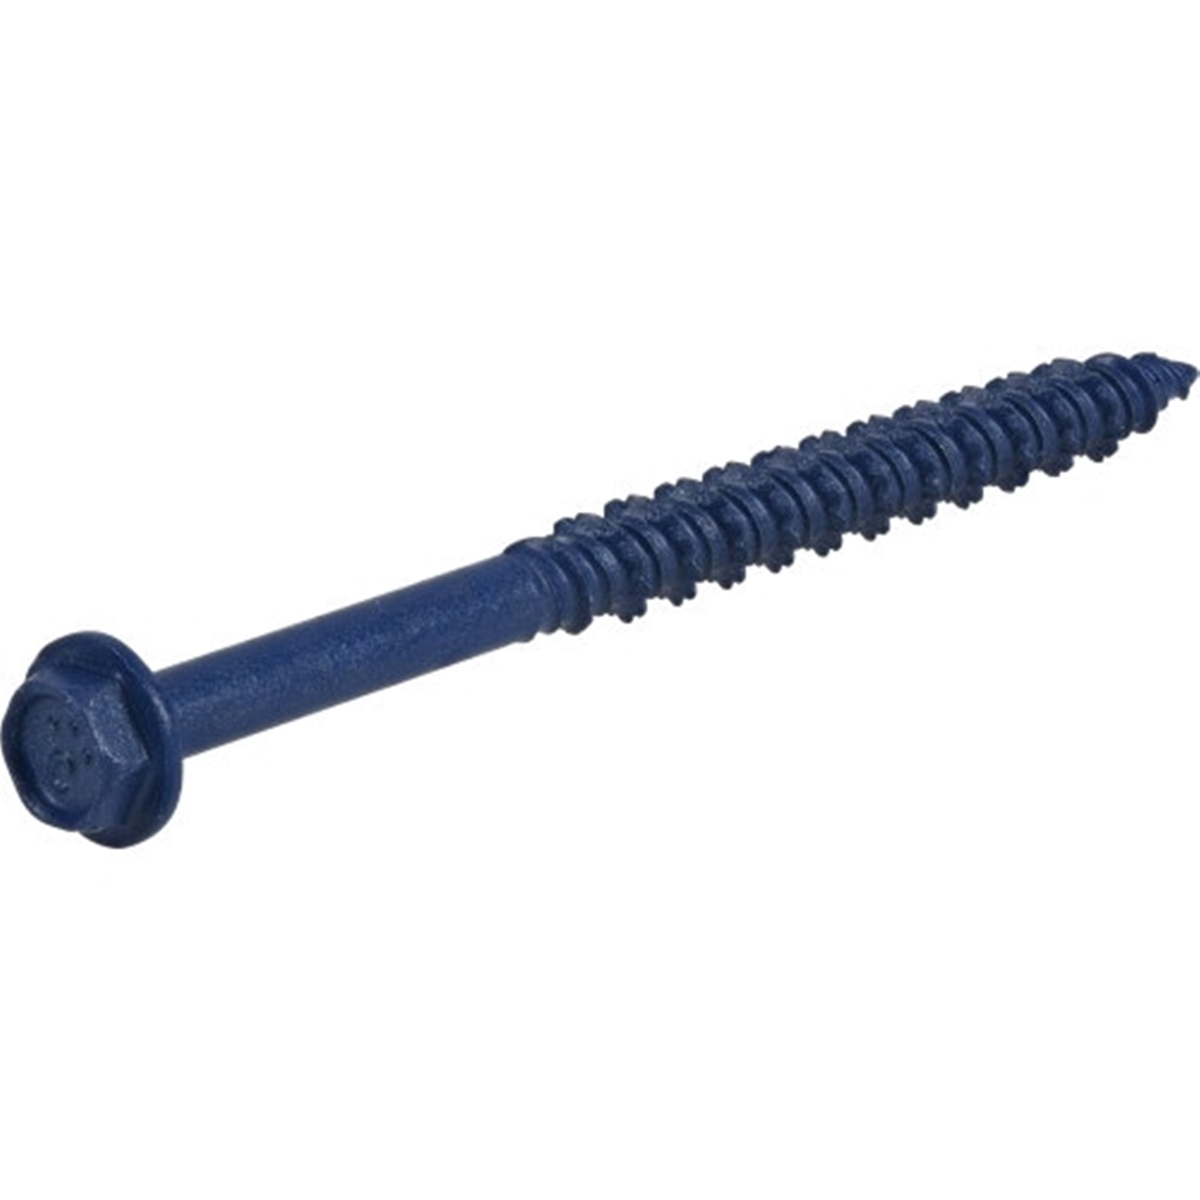 376503 Concrete Screw Anchor, 3/16 in Dia, 2-3/4 in L, Carbon Steel, Epoxy-Coated, 100/PK